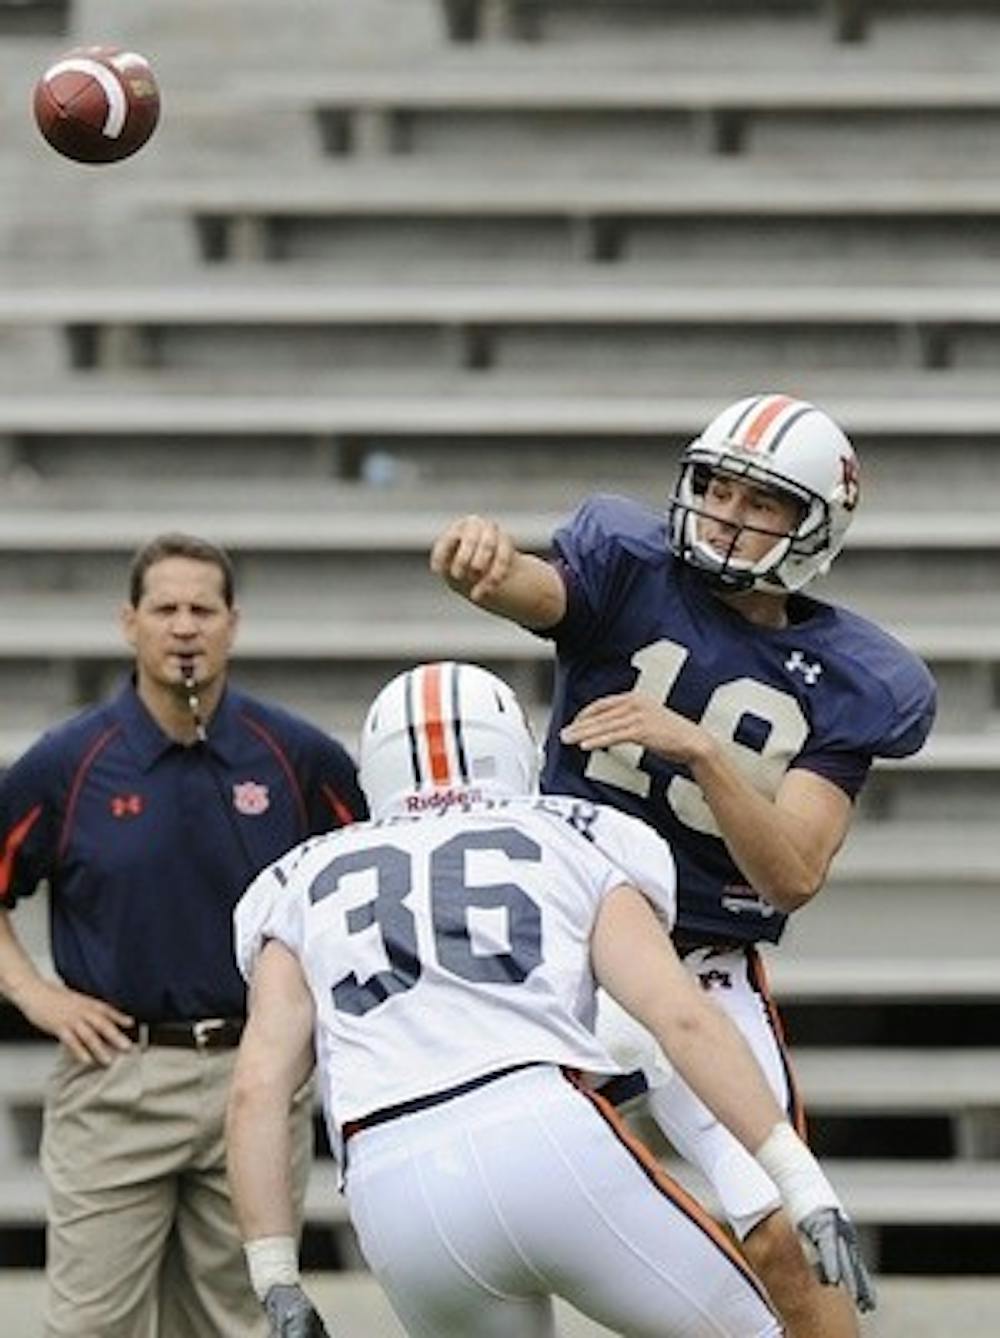 Auburn quarterback Neil Caudle throws under pressure from defender Wade Christopher in the second half of thier NCAA college footbal spring A-day game on Saturday, April 18, 2009 in Auburn, Ala. Coach Gene Chizik is in the background. Todd Van Emst